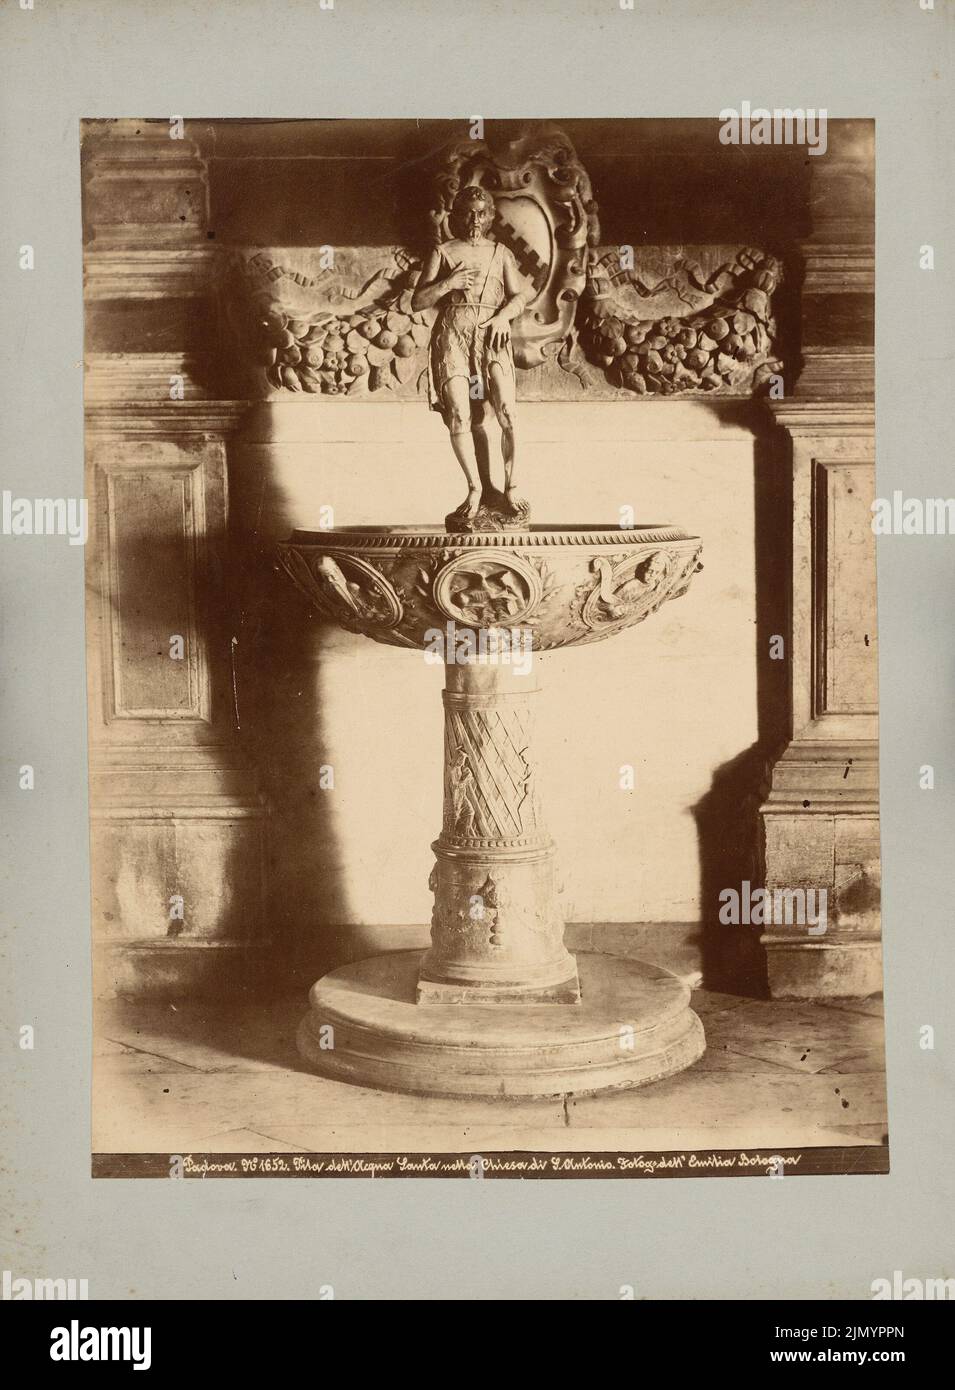 Emilia, S. Antonio, Padua (without dat.): View of holy water basin. Photo on cardboard, 32.2 x 23.7 cm (including scan edges) Stock Photo